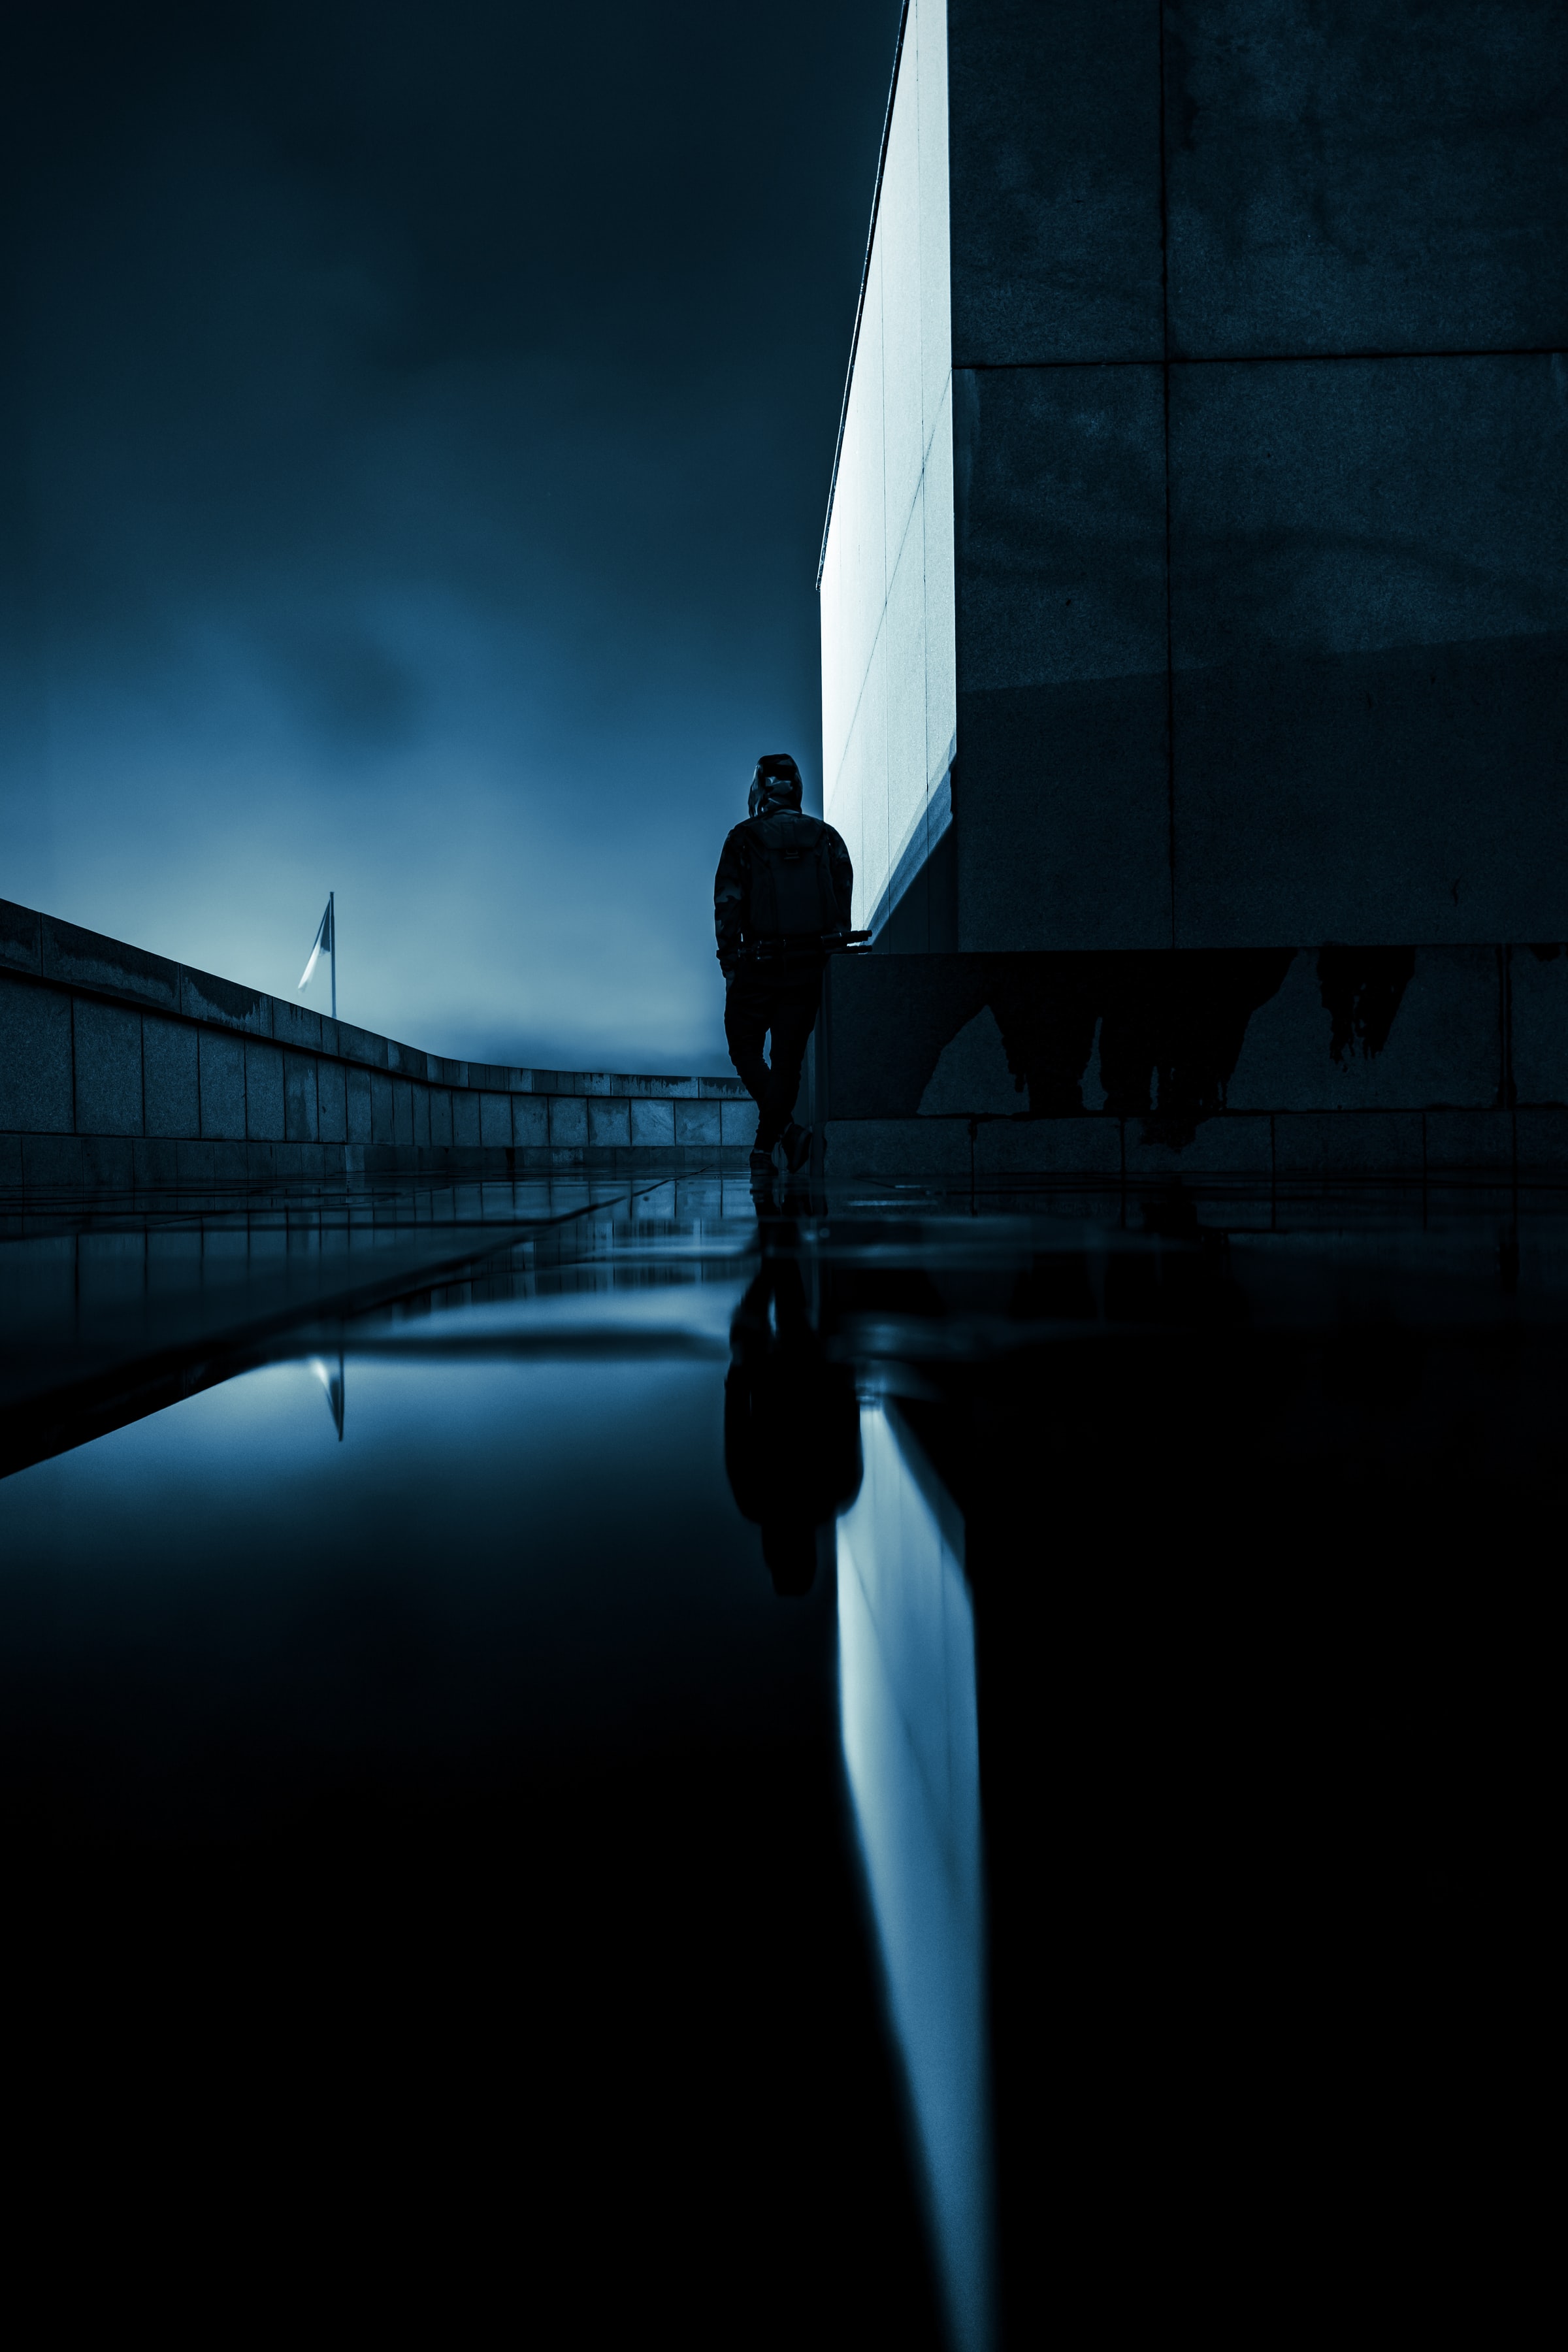 153906 free wallpaper 2160x3840 for phone, download images loneliness, dark, person, night 2160x3840 for mobile